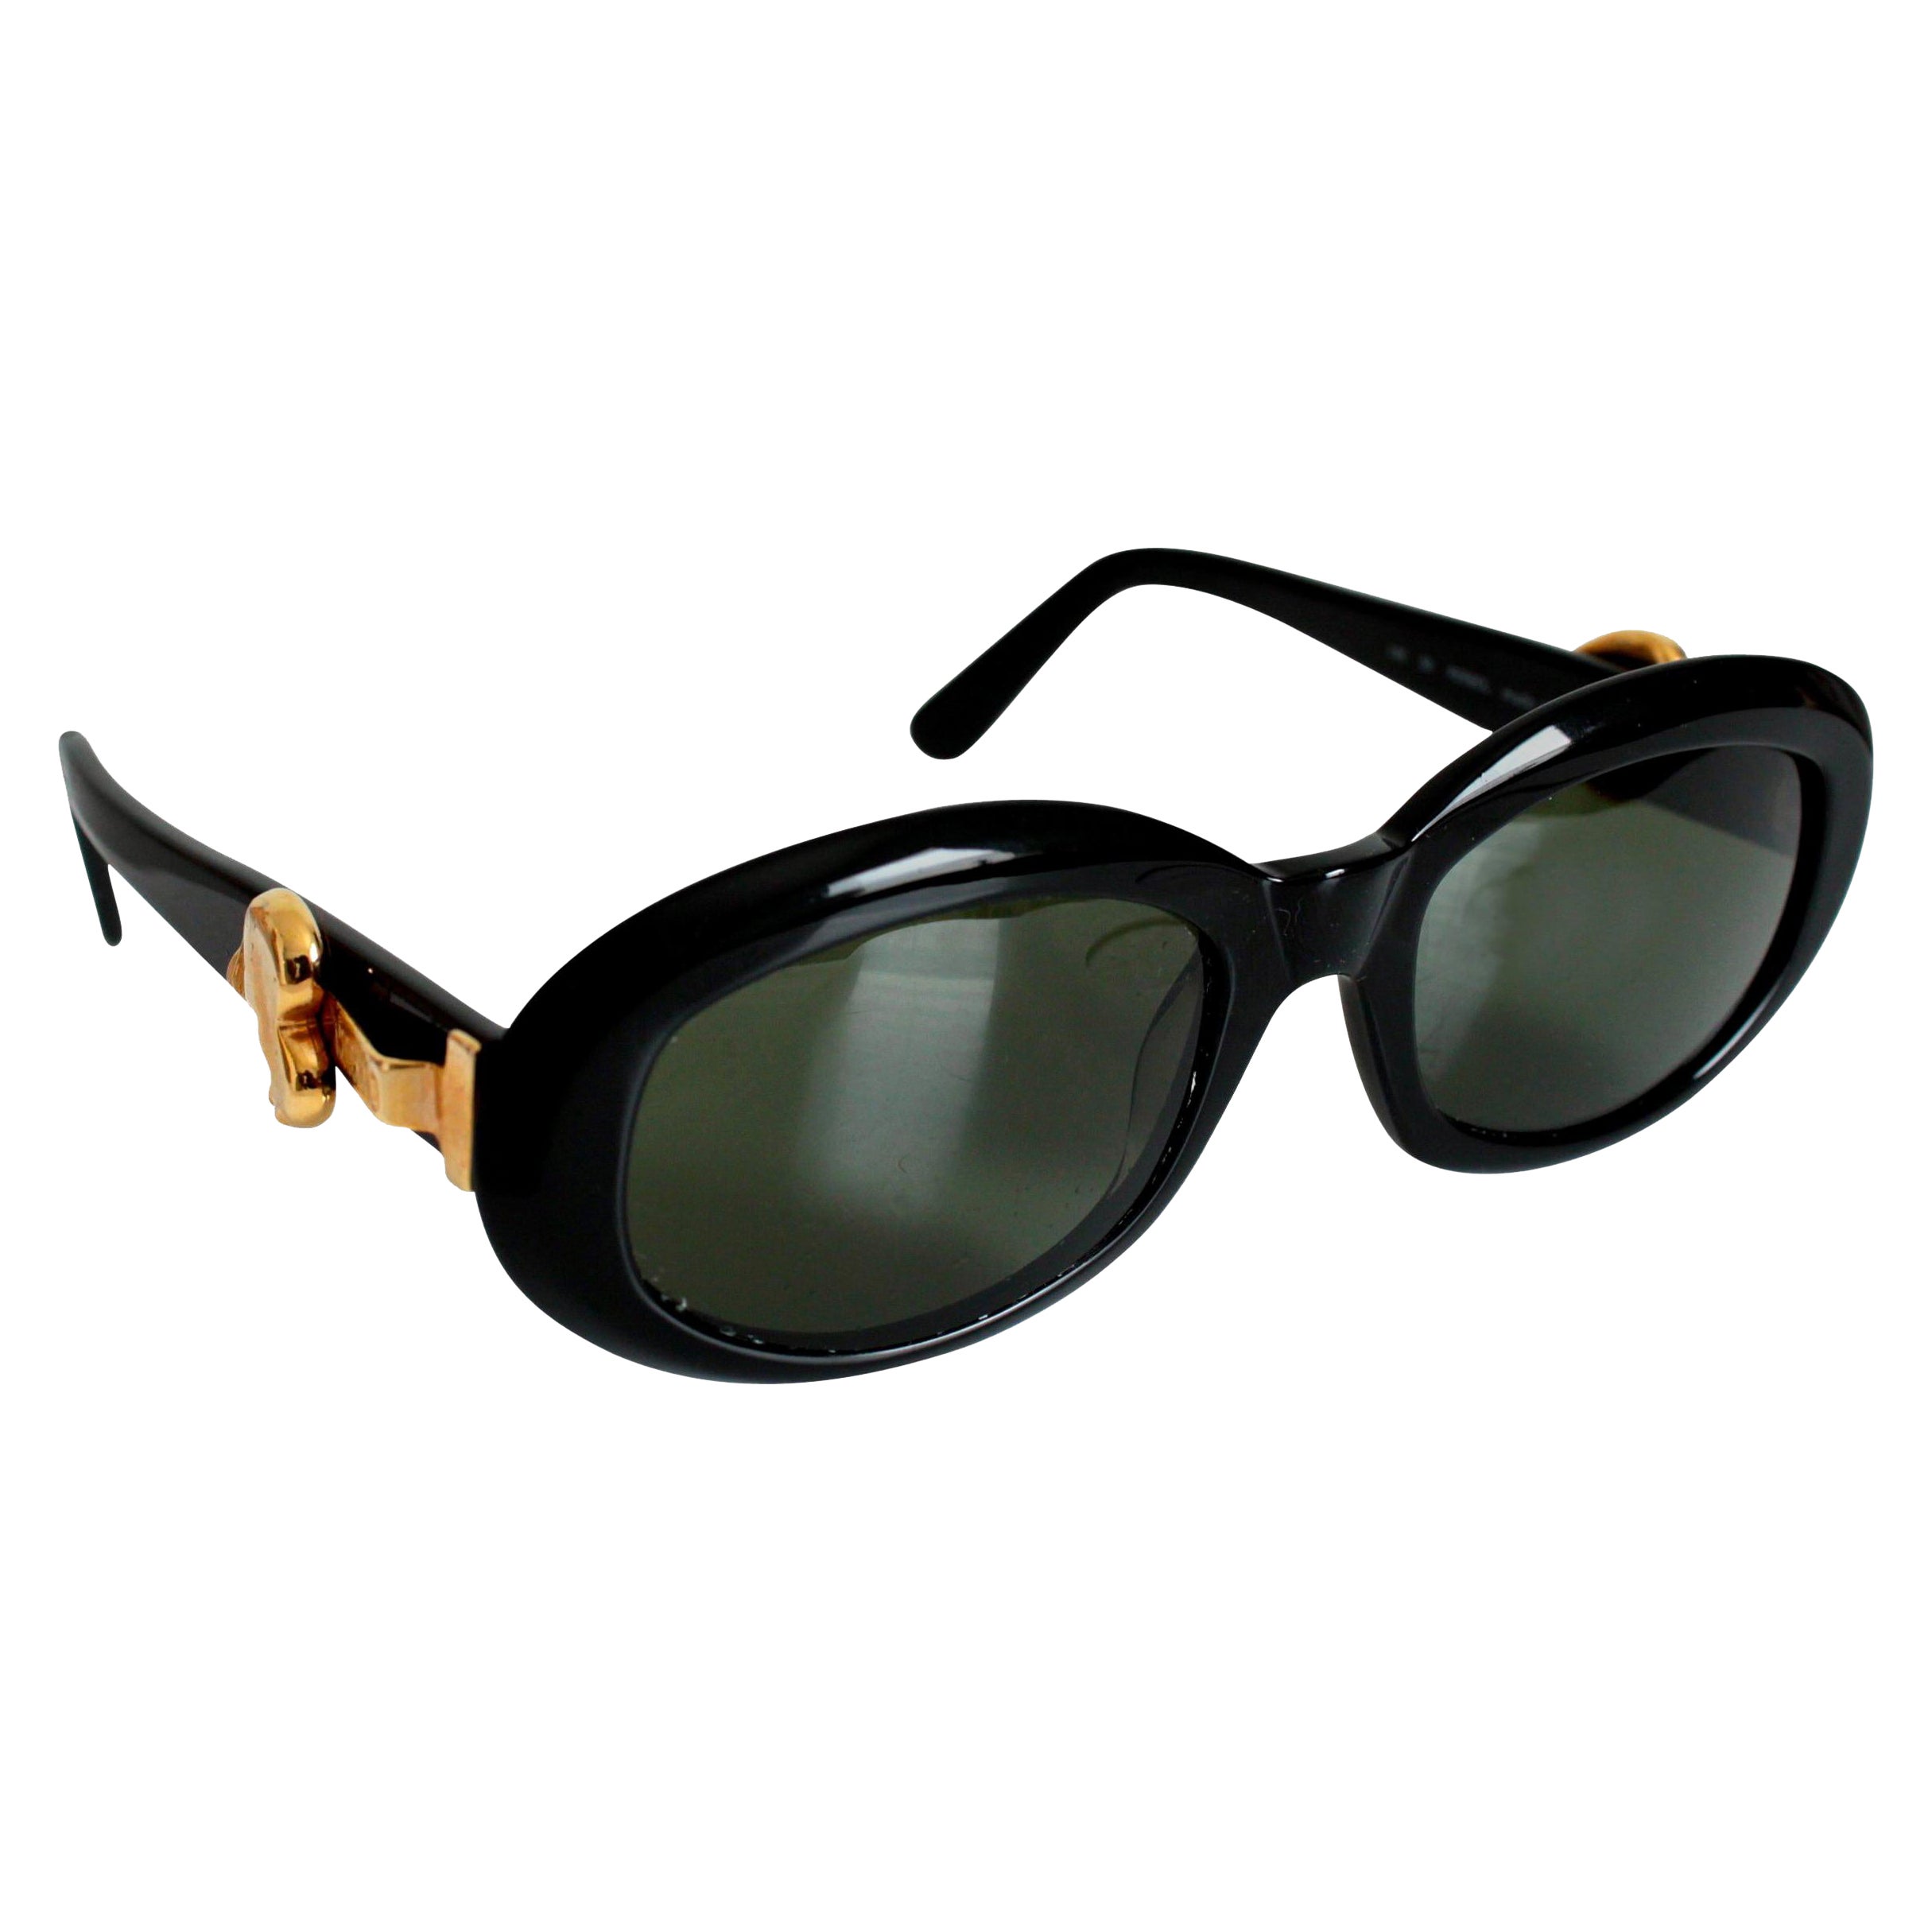 Moschino Sunglasses by Persol Ratti Black Resin Gold Heart Ladies 1985  For Sale